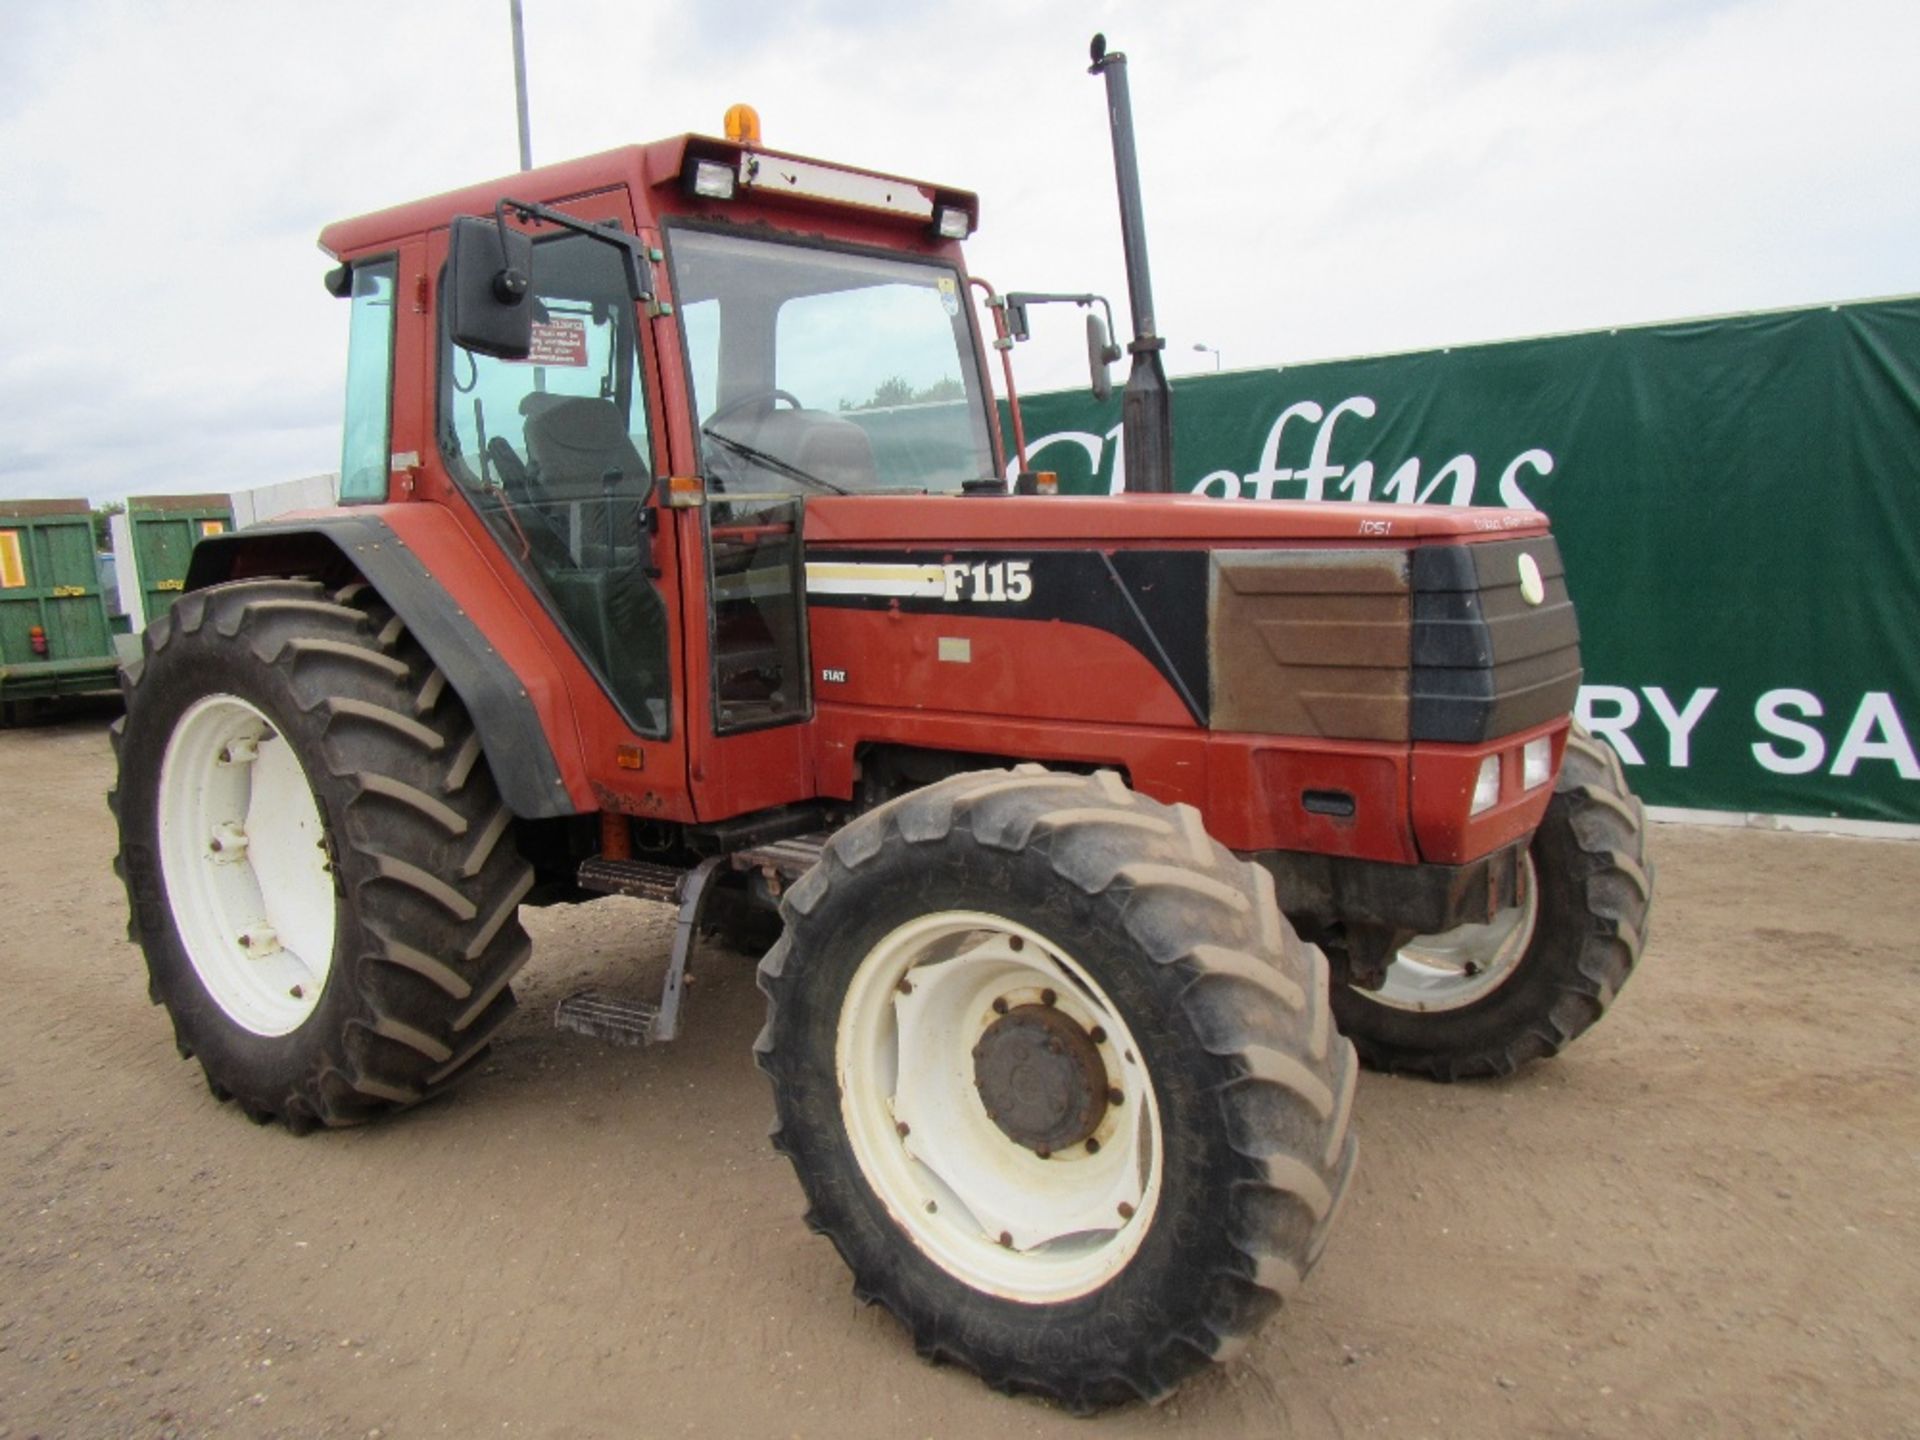 Fiat F115 Winner Tractor. Direct from farm. V5 will be supplied Reg. No. N448 FPU - Image 3 of 14